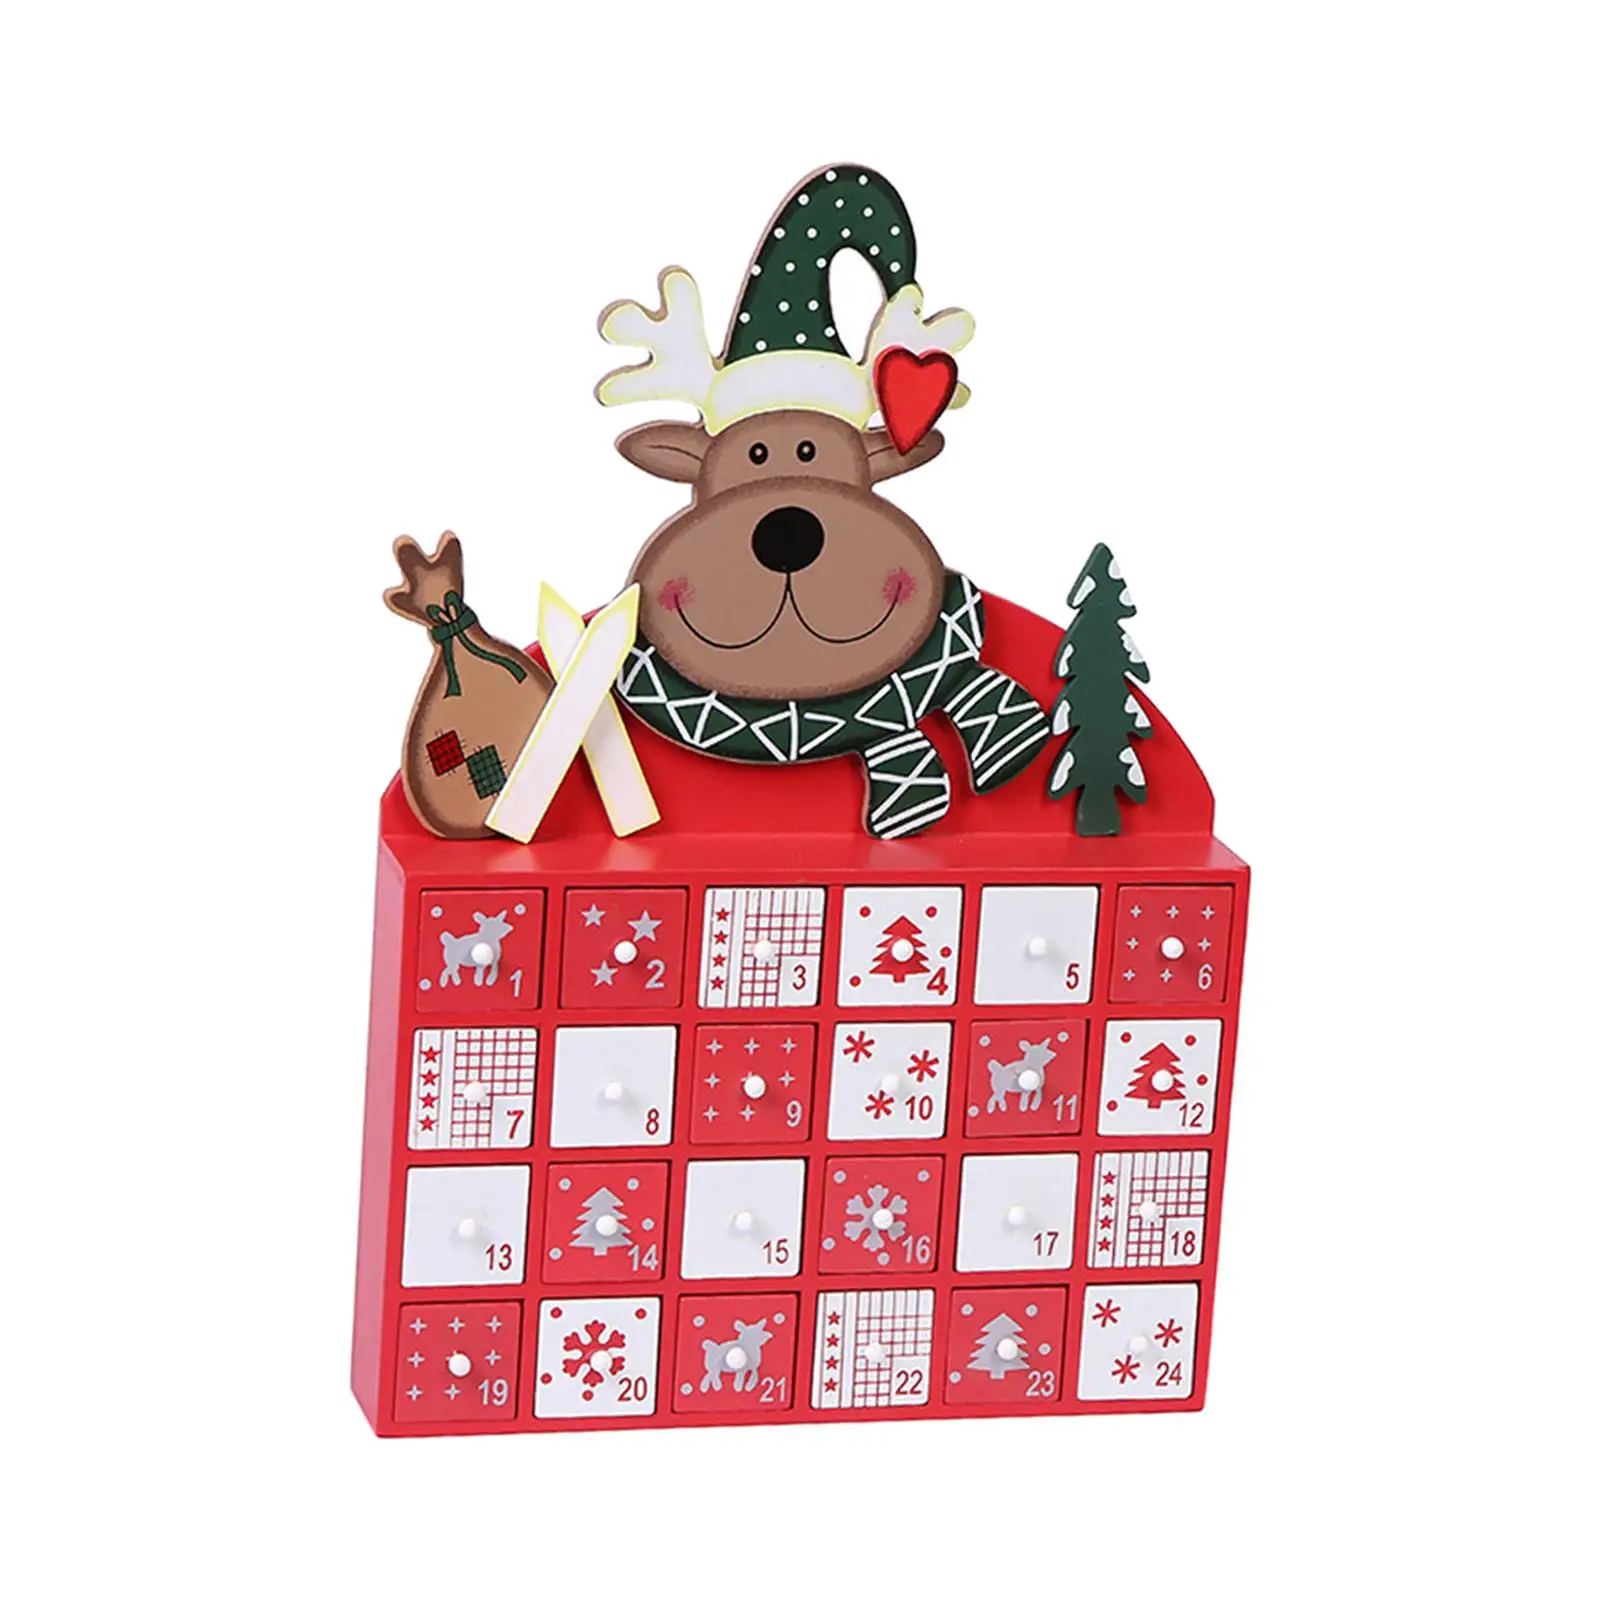 Wooden Calendar Box Reindeer Pattern with Storage Drawers Candy Organizer Fillable for Holiday Desktop Home Tabletop Ornaments